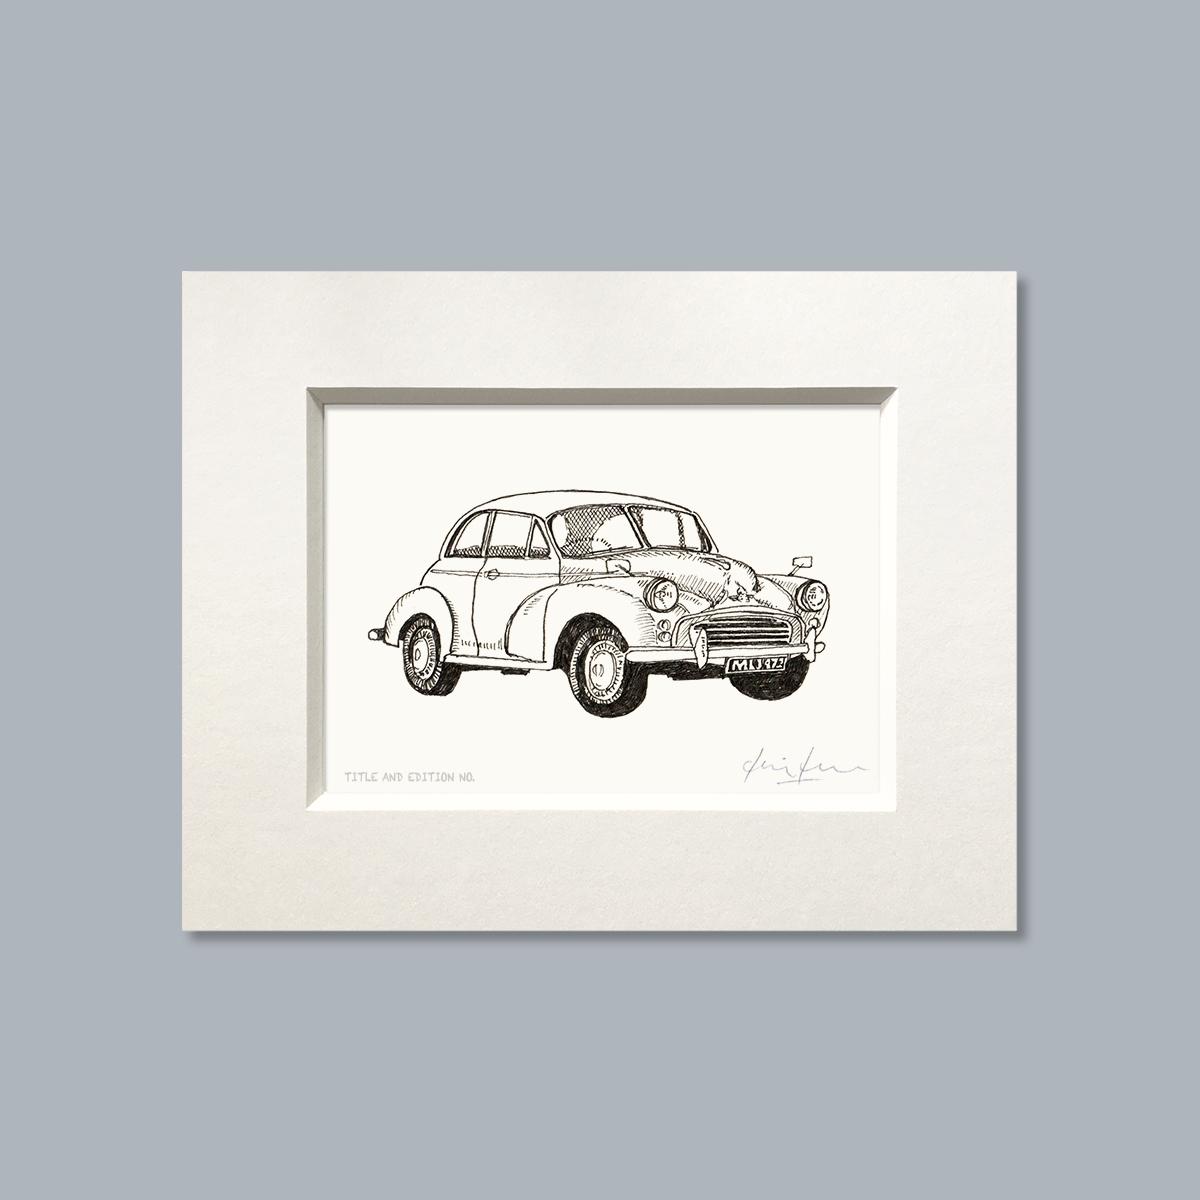 Limited edition print from pen and ink drawing of a Morris Minor in a white mount